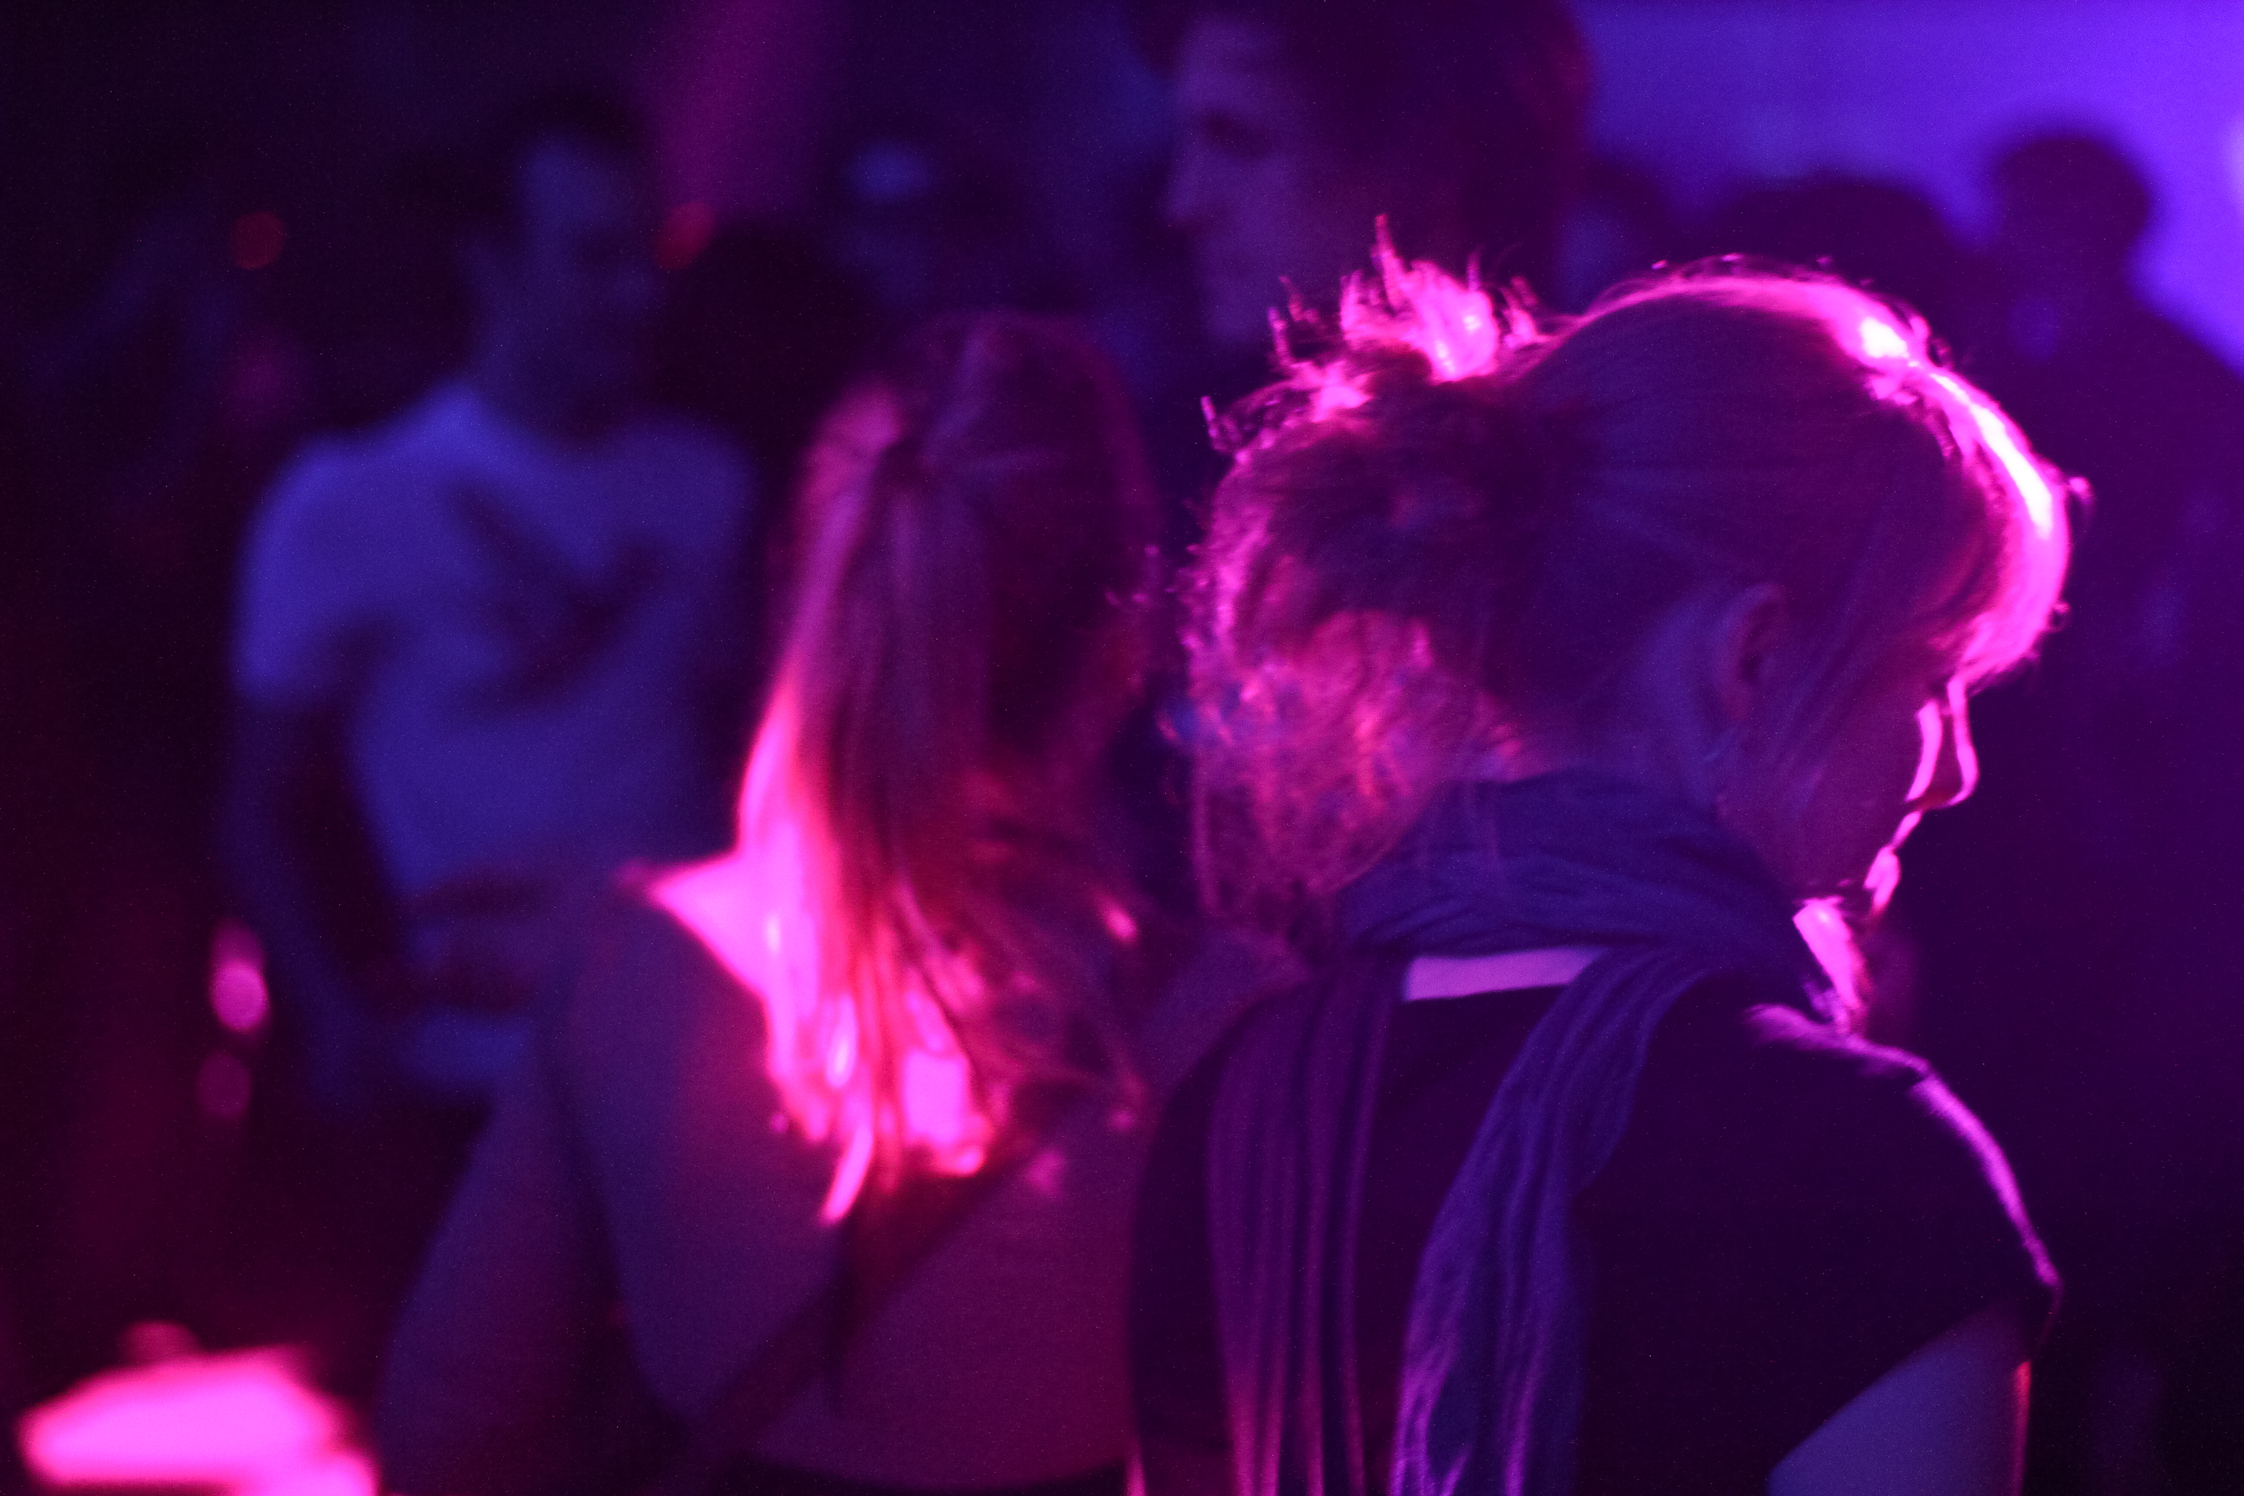 people on a crowded, purple - lit night at the club